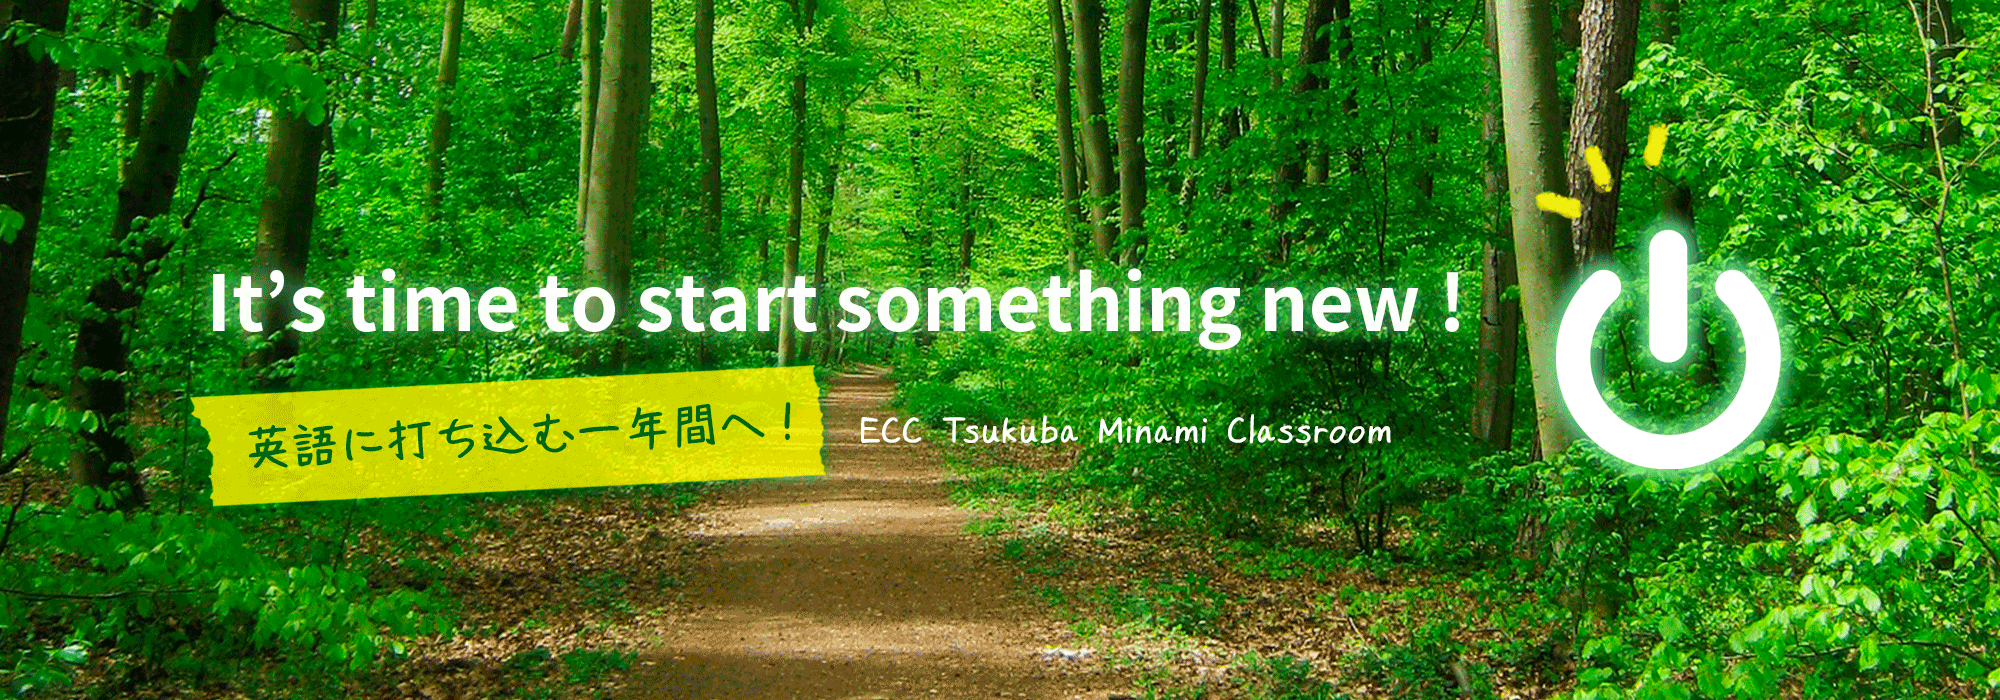 It's time to start something new!